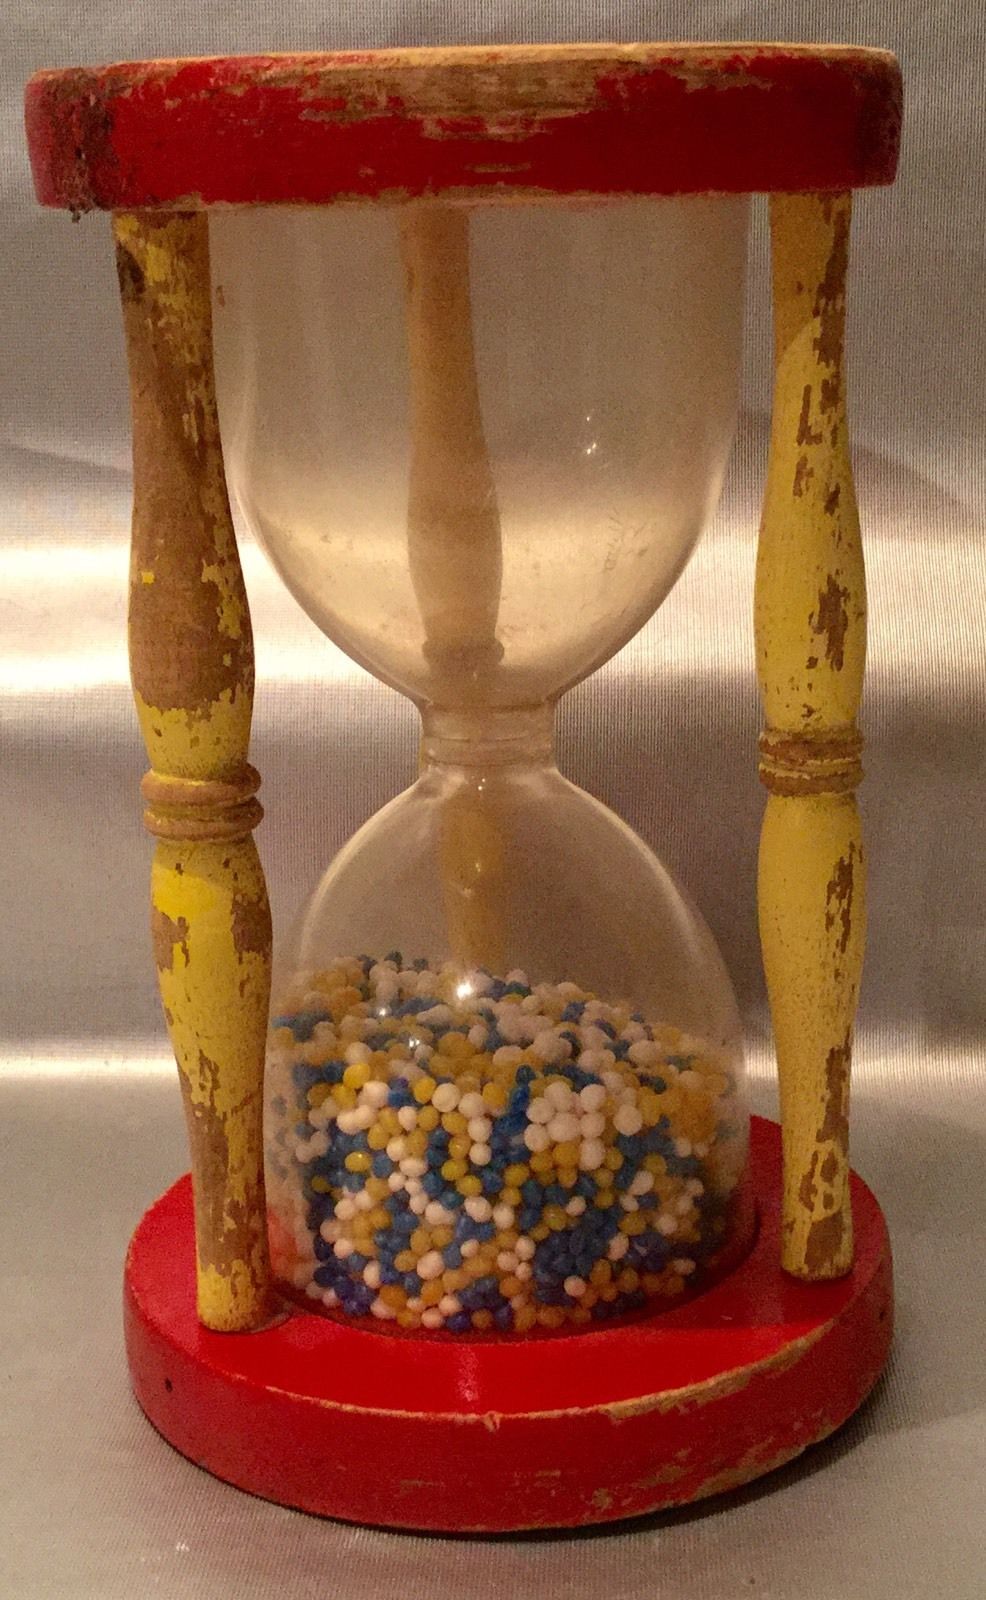 Playskool SANDS OF TIME HOURGLASS Vintage Toy - Decor Or Collection Piece - $7.94